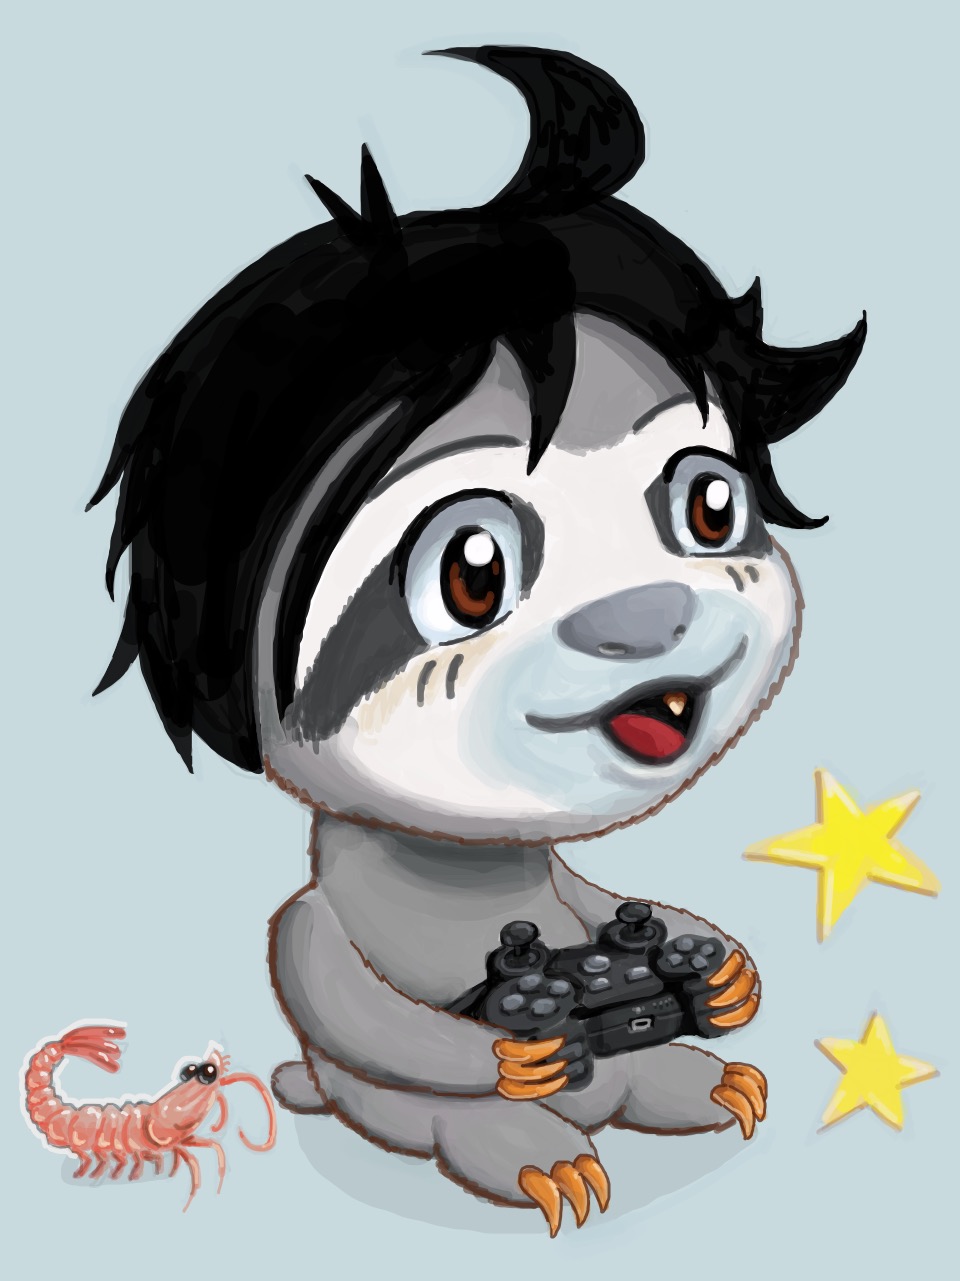 A chibi-style sloth with spiky black hair, excitedly playing video games.